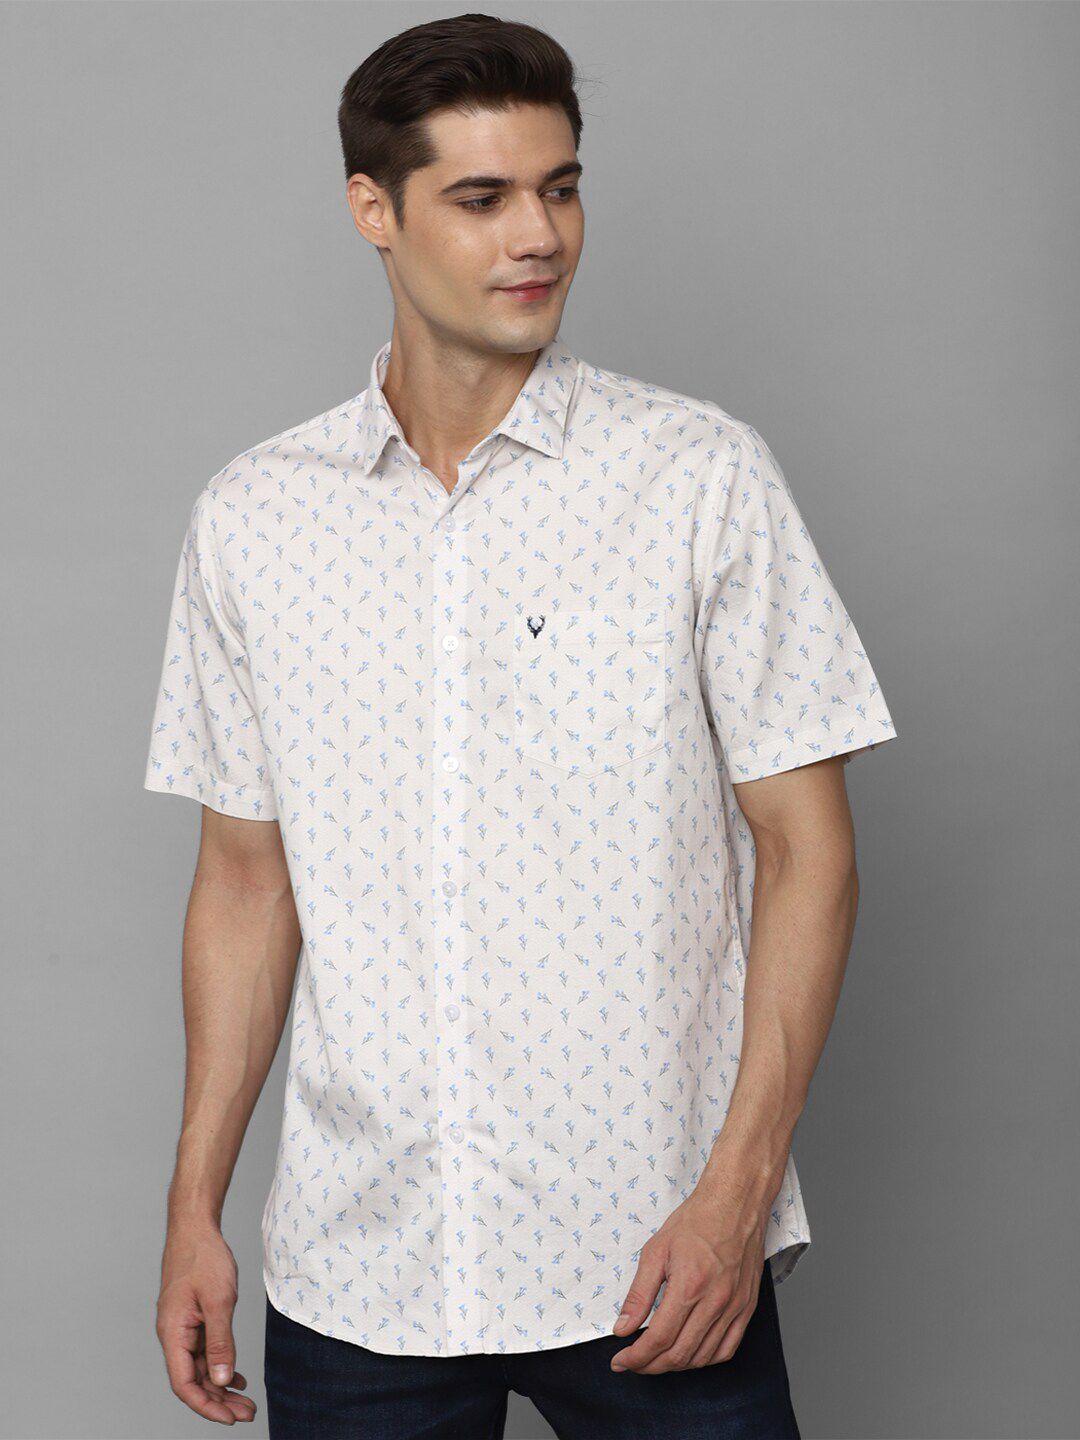 allen solly slim fit floral printed casual pure cotton shirt